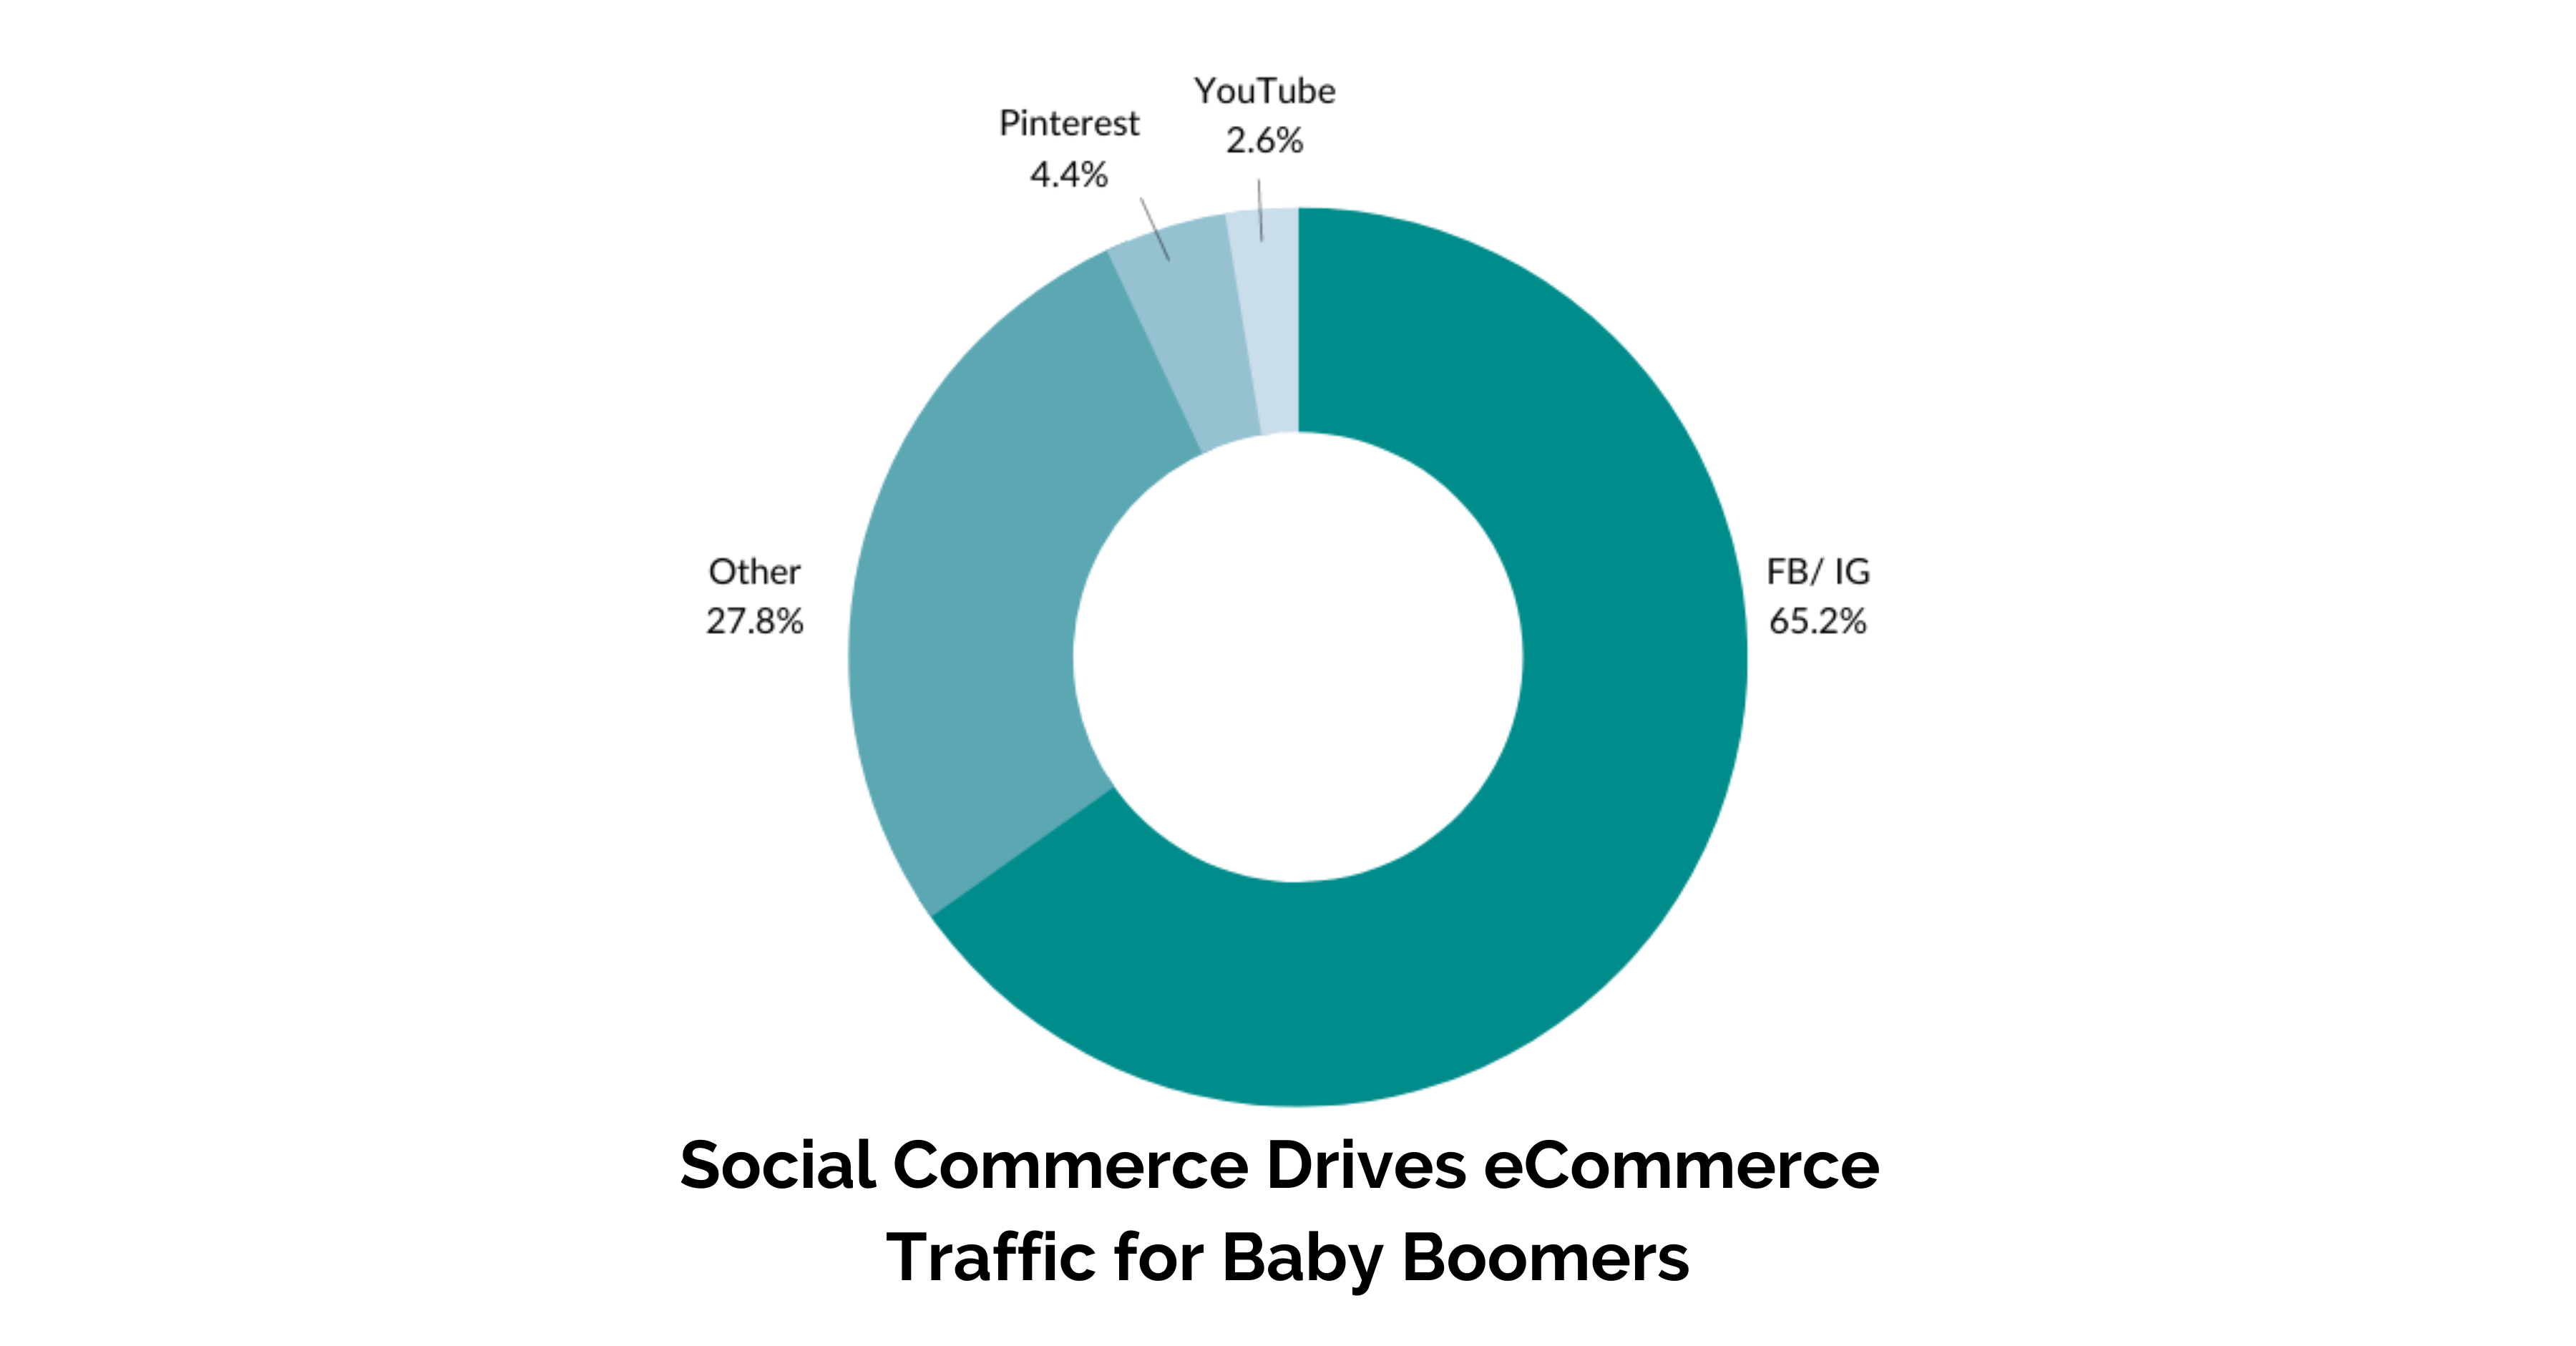 Social Commerce Drives eCommerce Traffic for Baby Boomers